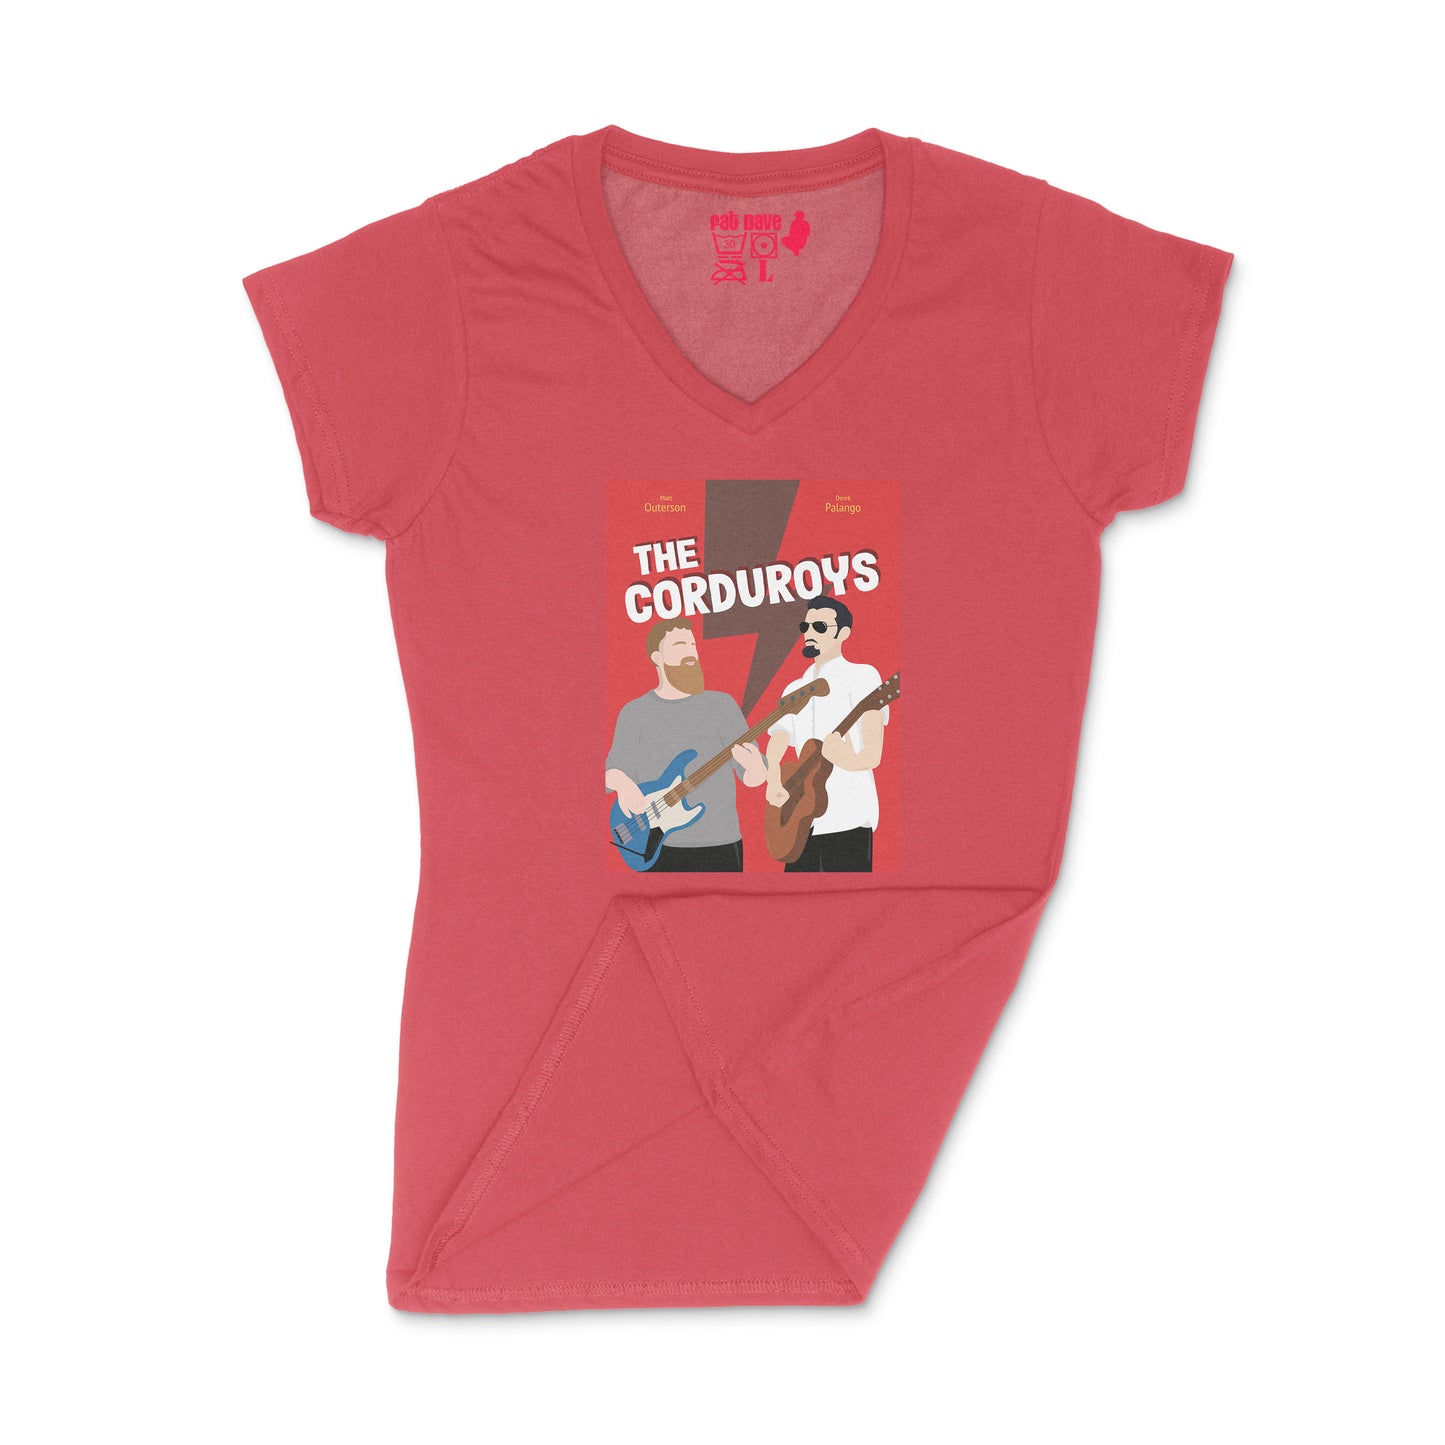 Brantford, Fat Dave, Ladies V-Neck T-Shirt, Musician, Poster, The Corduroys, Cardinal Red